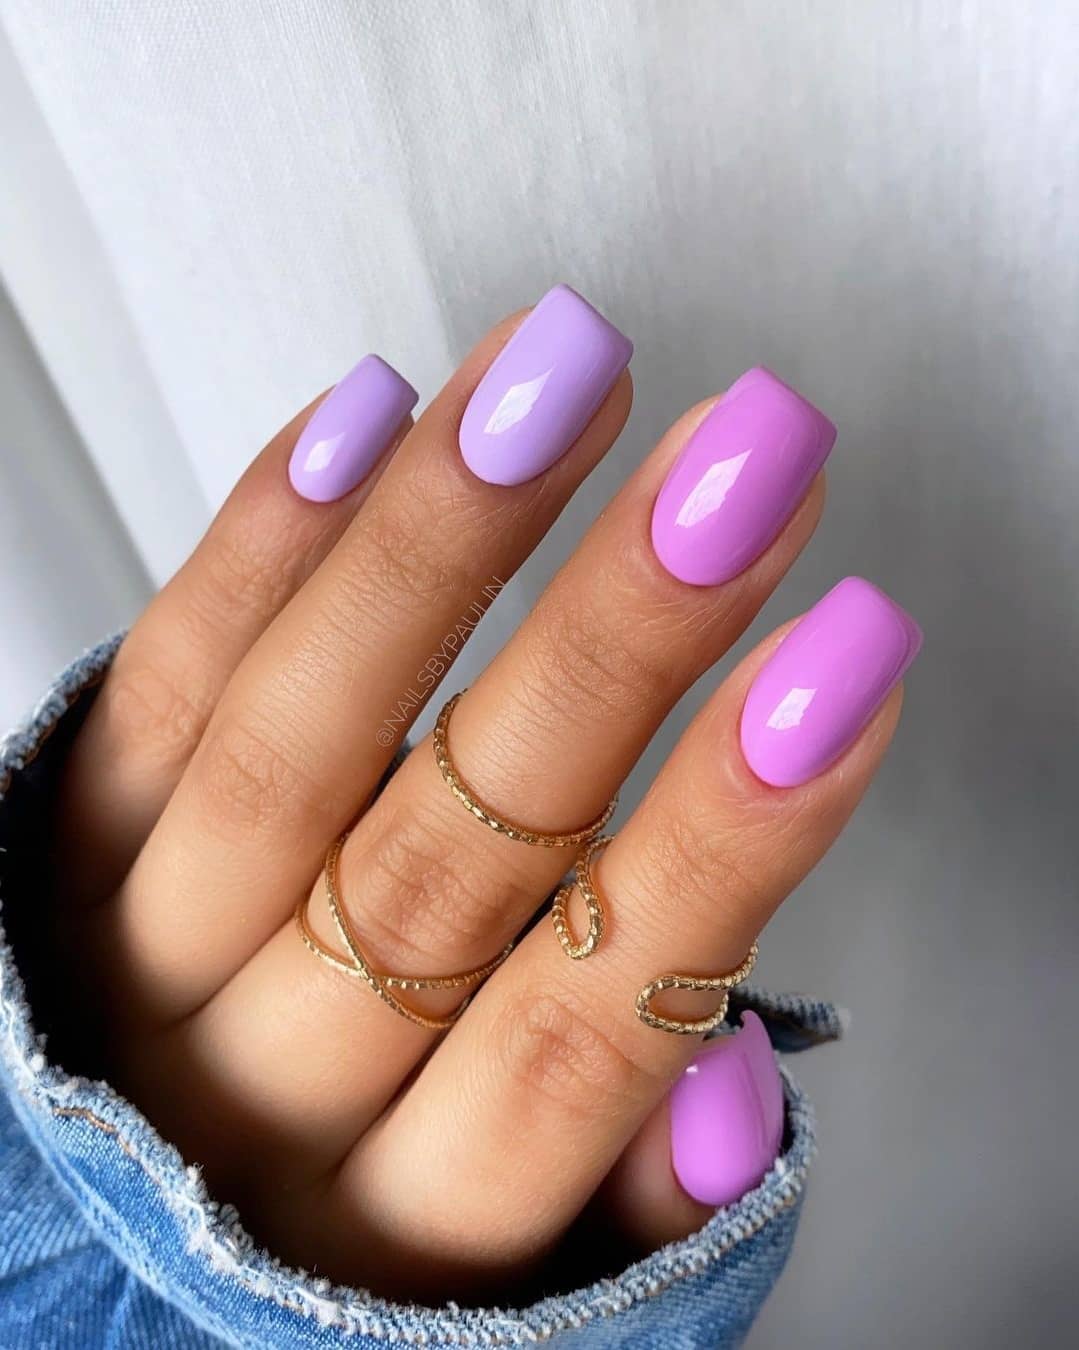 25 Trending Summer Nail Colors And Designs For 2021 images 7